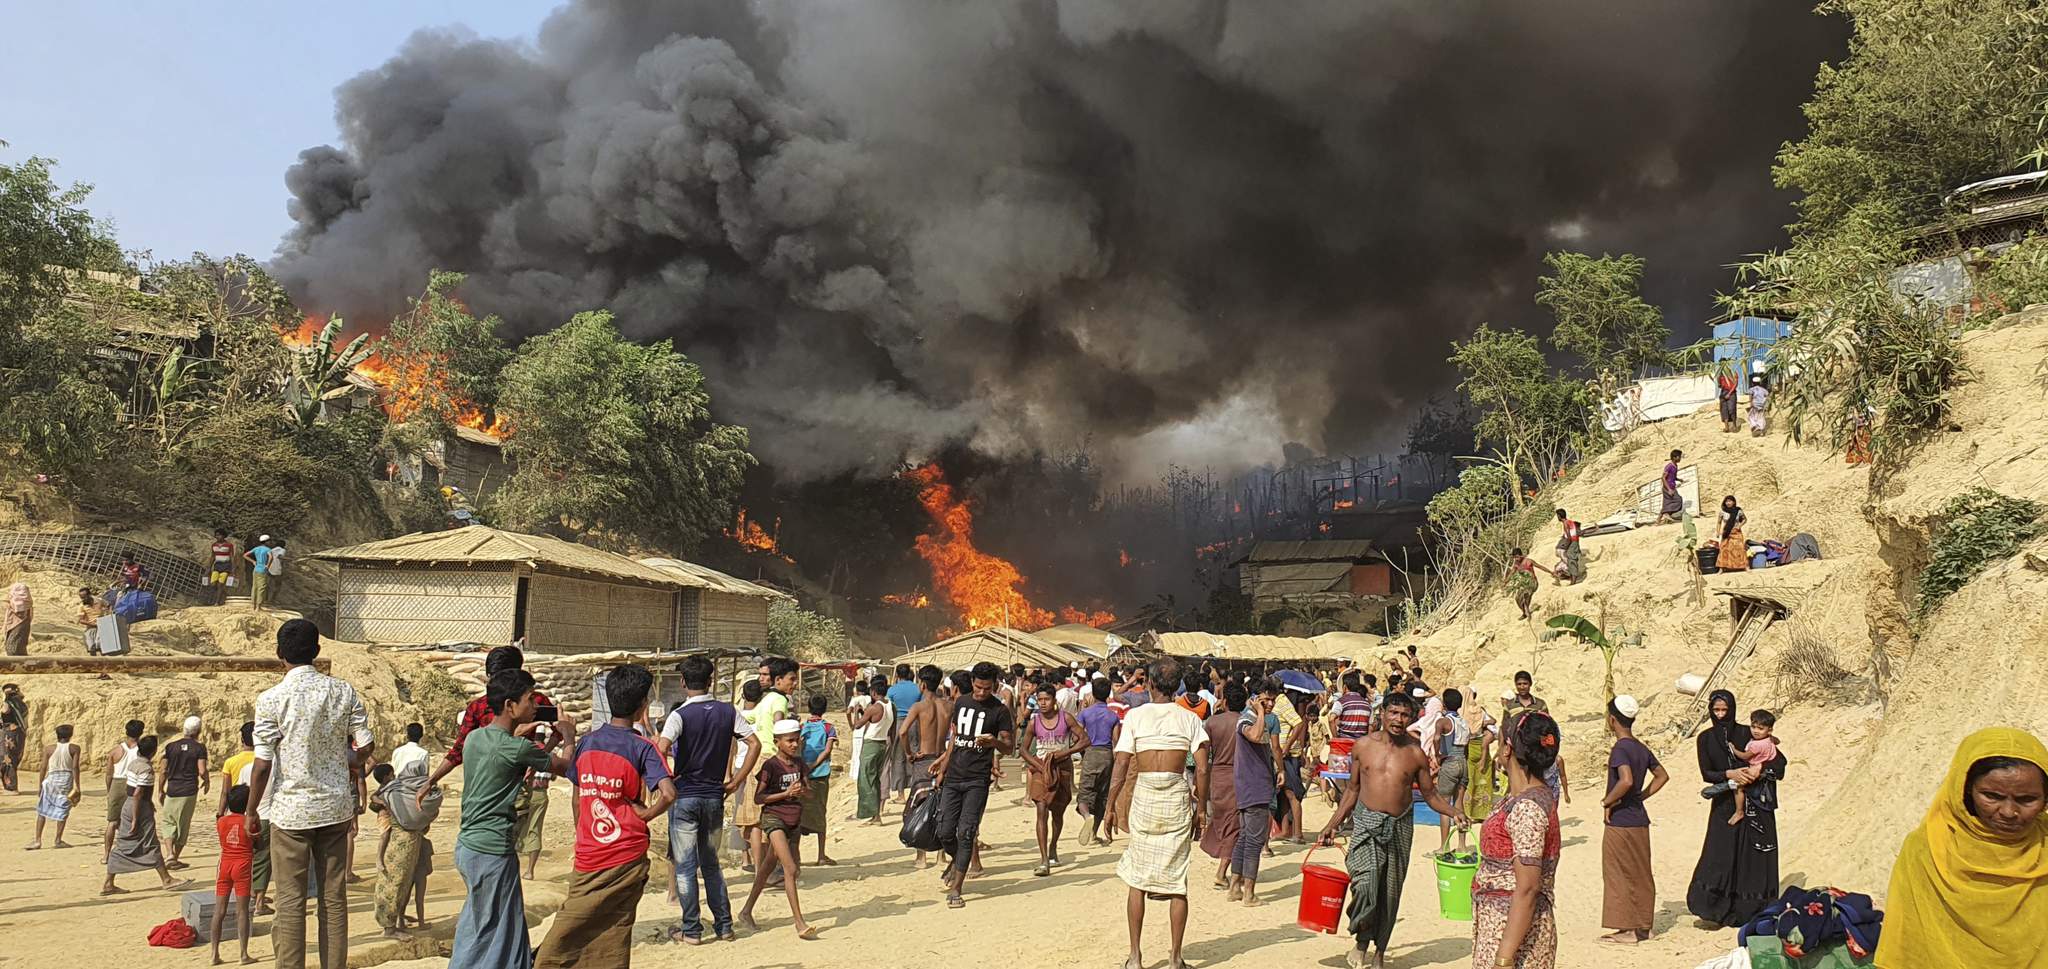 Fire guts hundreds of shelters in Rohingya refugee camp